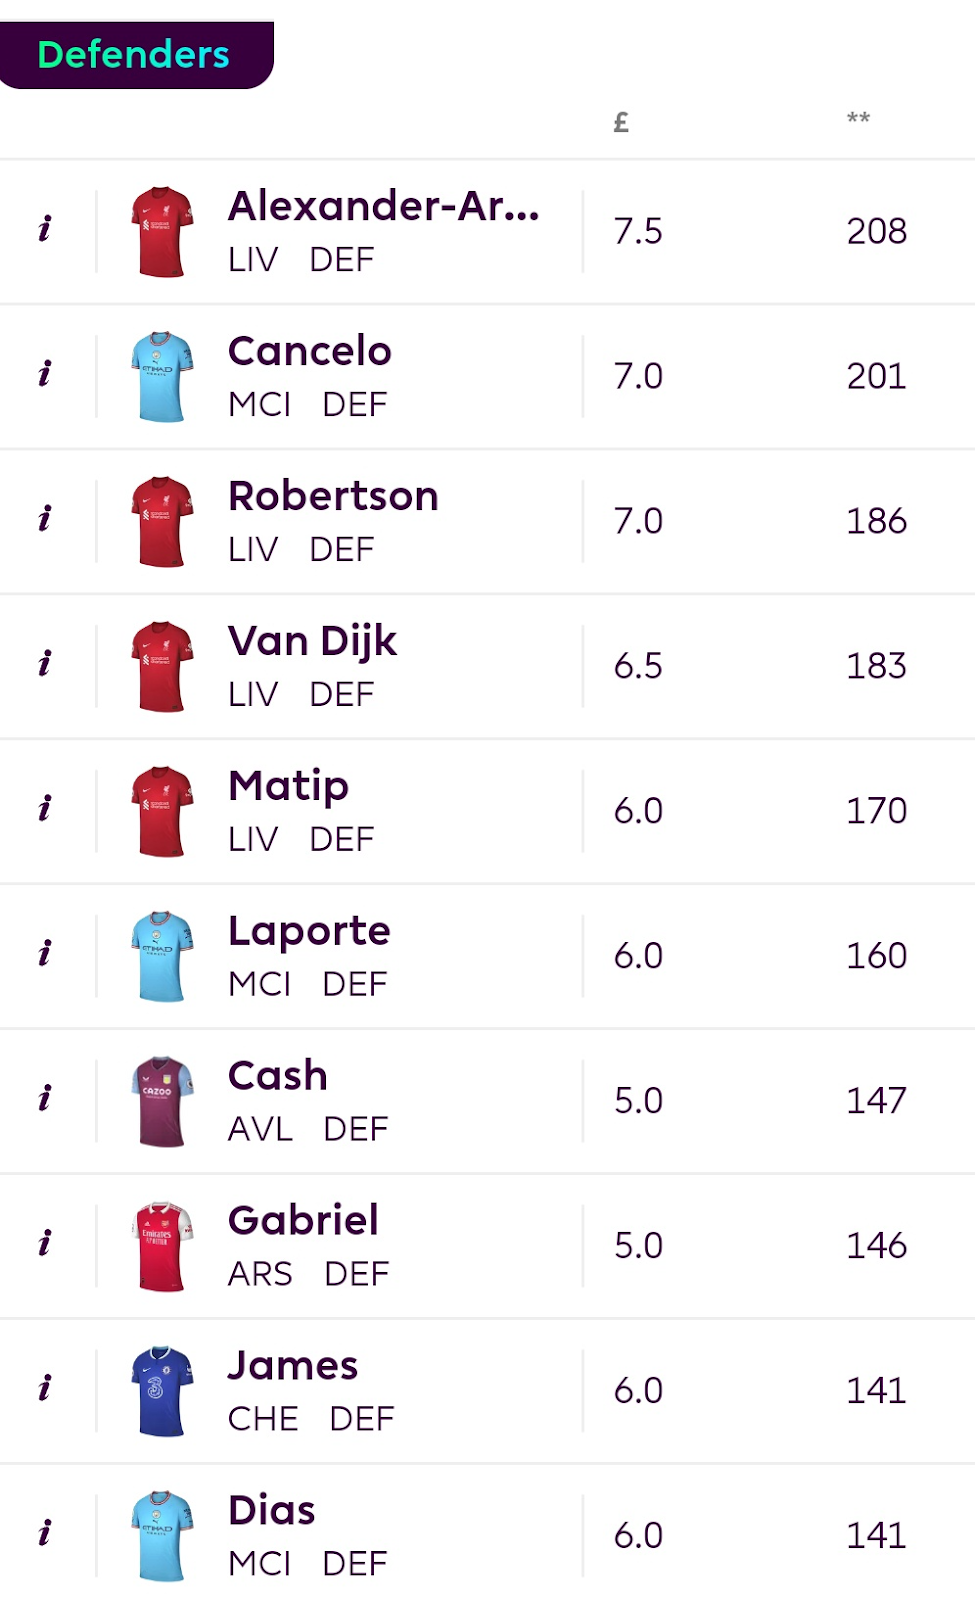 Top 10 Defenders from 21/22 season based on FPL Points 